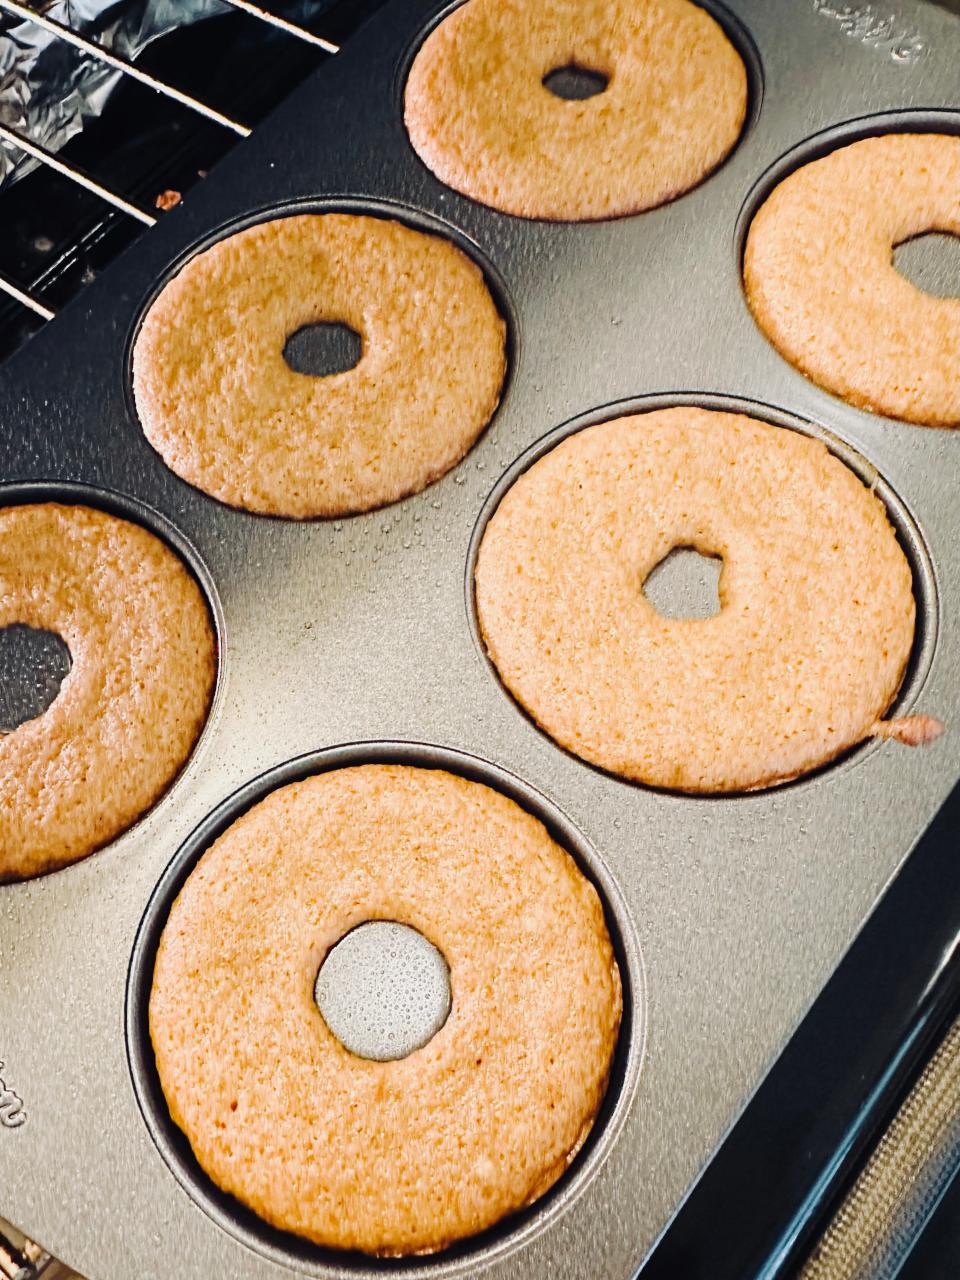 Don't have a donut pan like this? Make muffins instead.